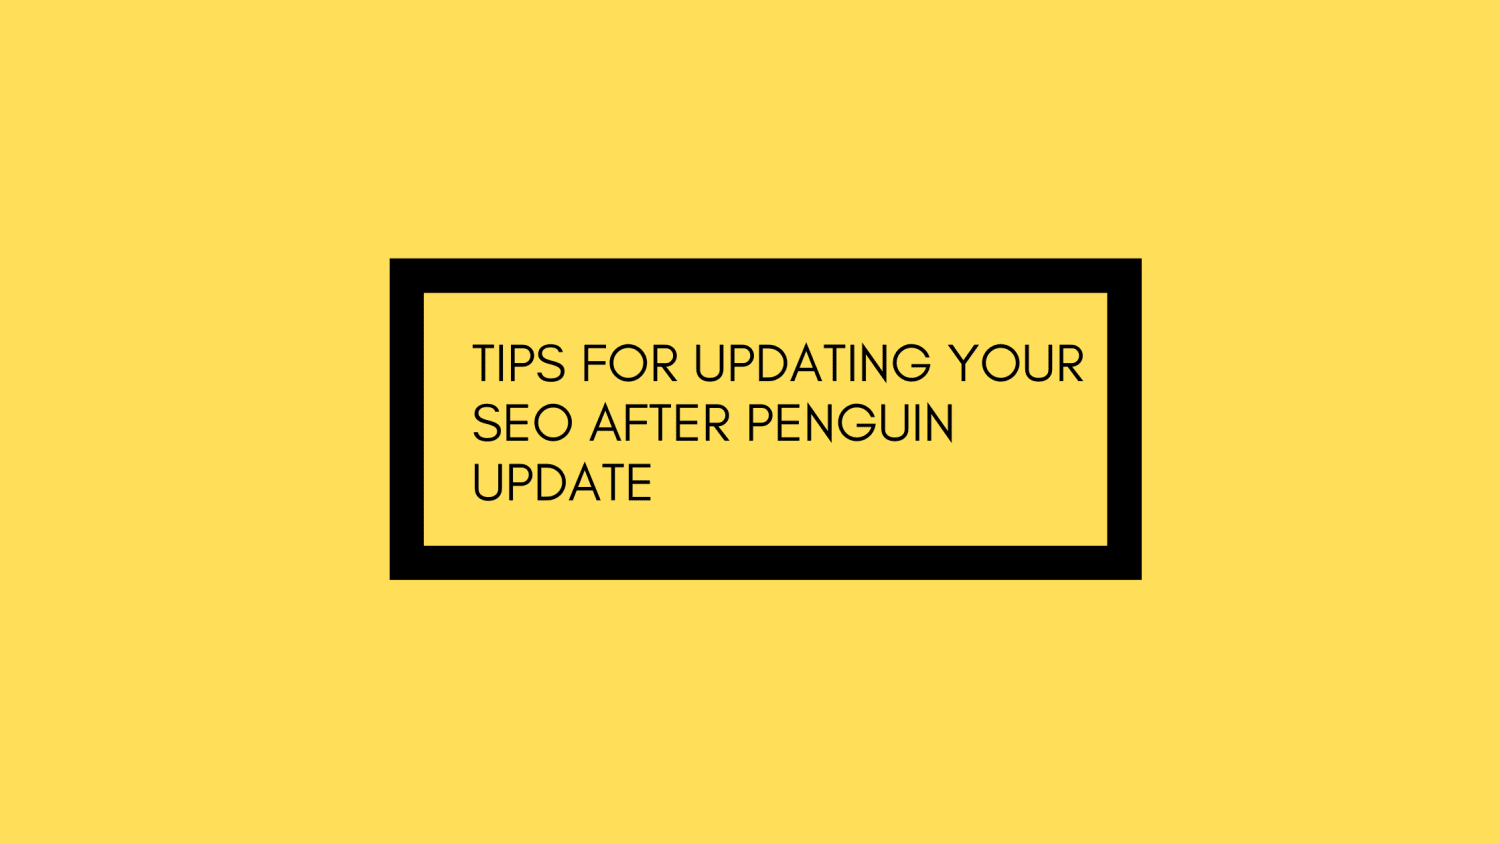 Tips for Updating Your SEO After Penguin Update